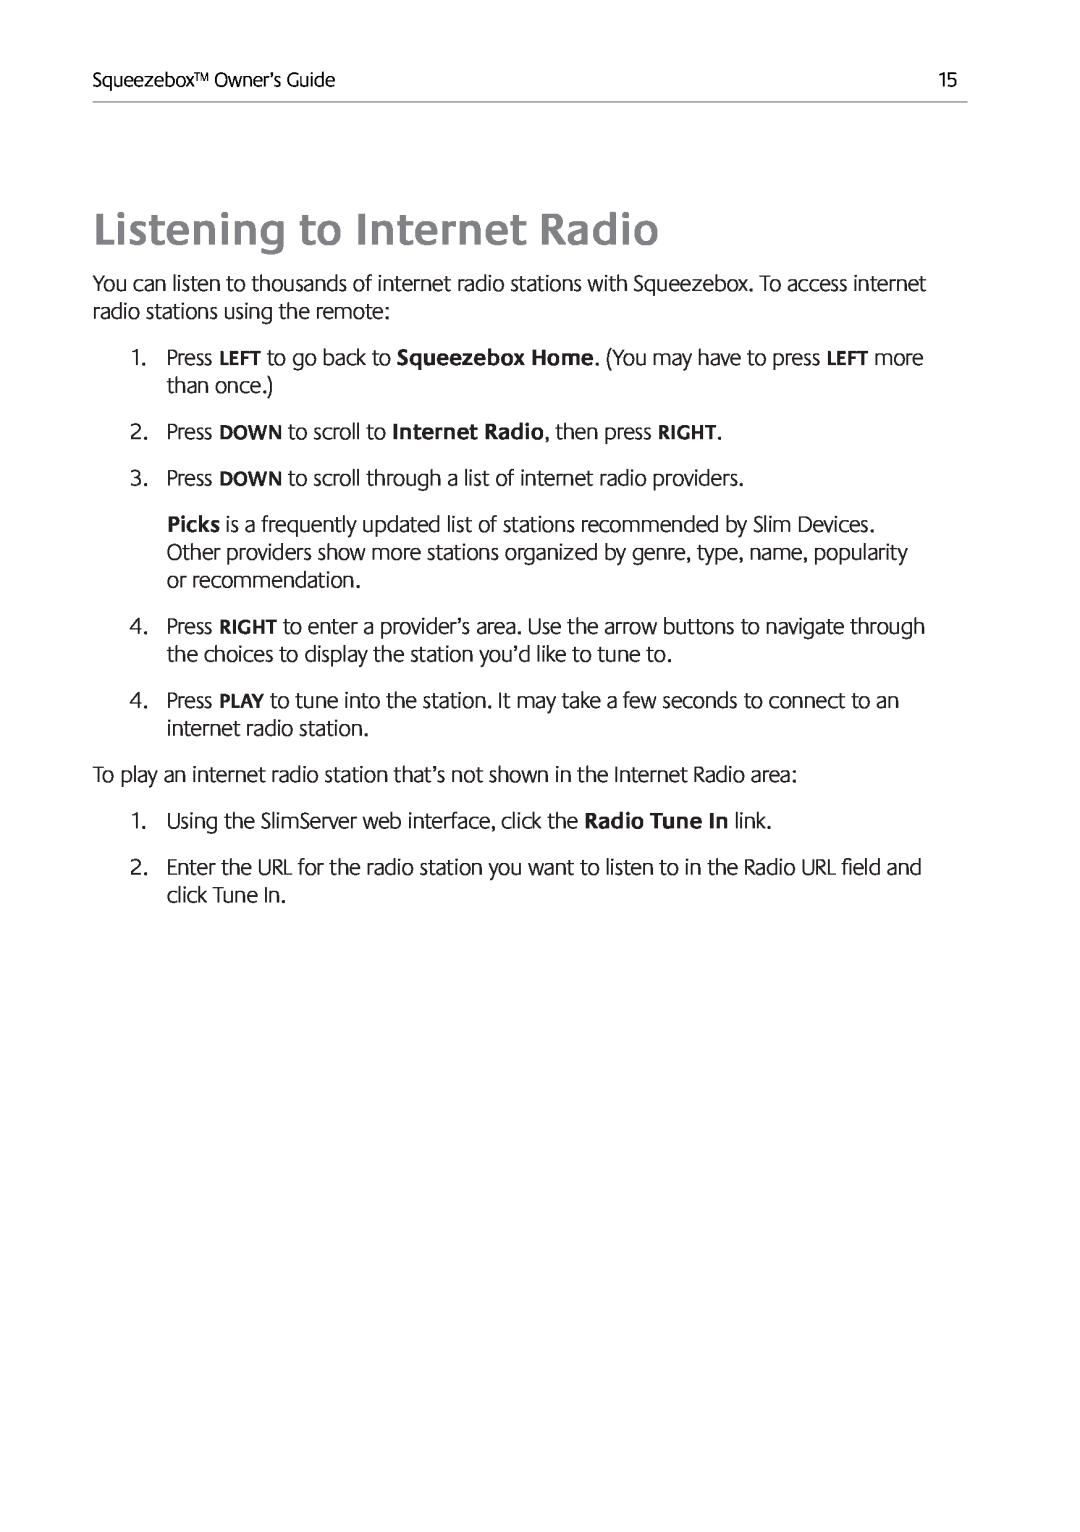 Logitech Ft manual Listening to Internet Radio, Squeezebox Owner’s Guide 